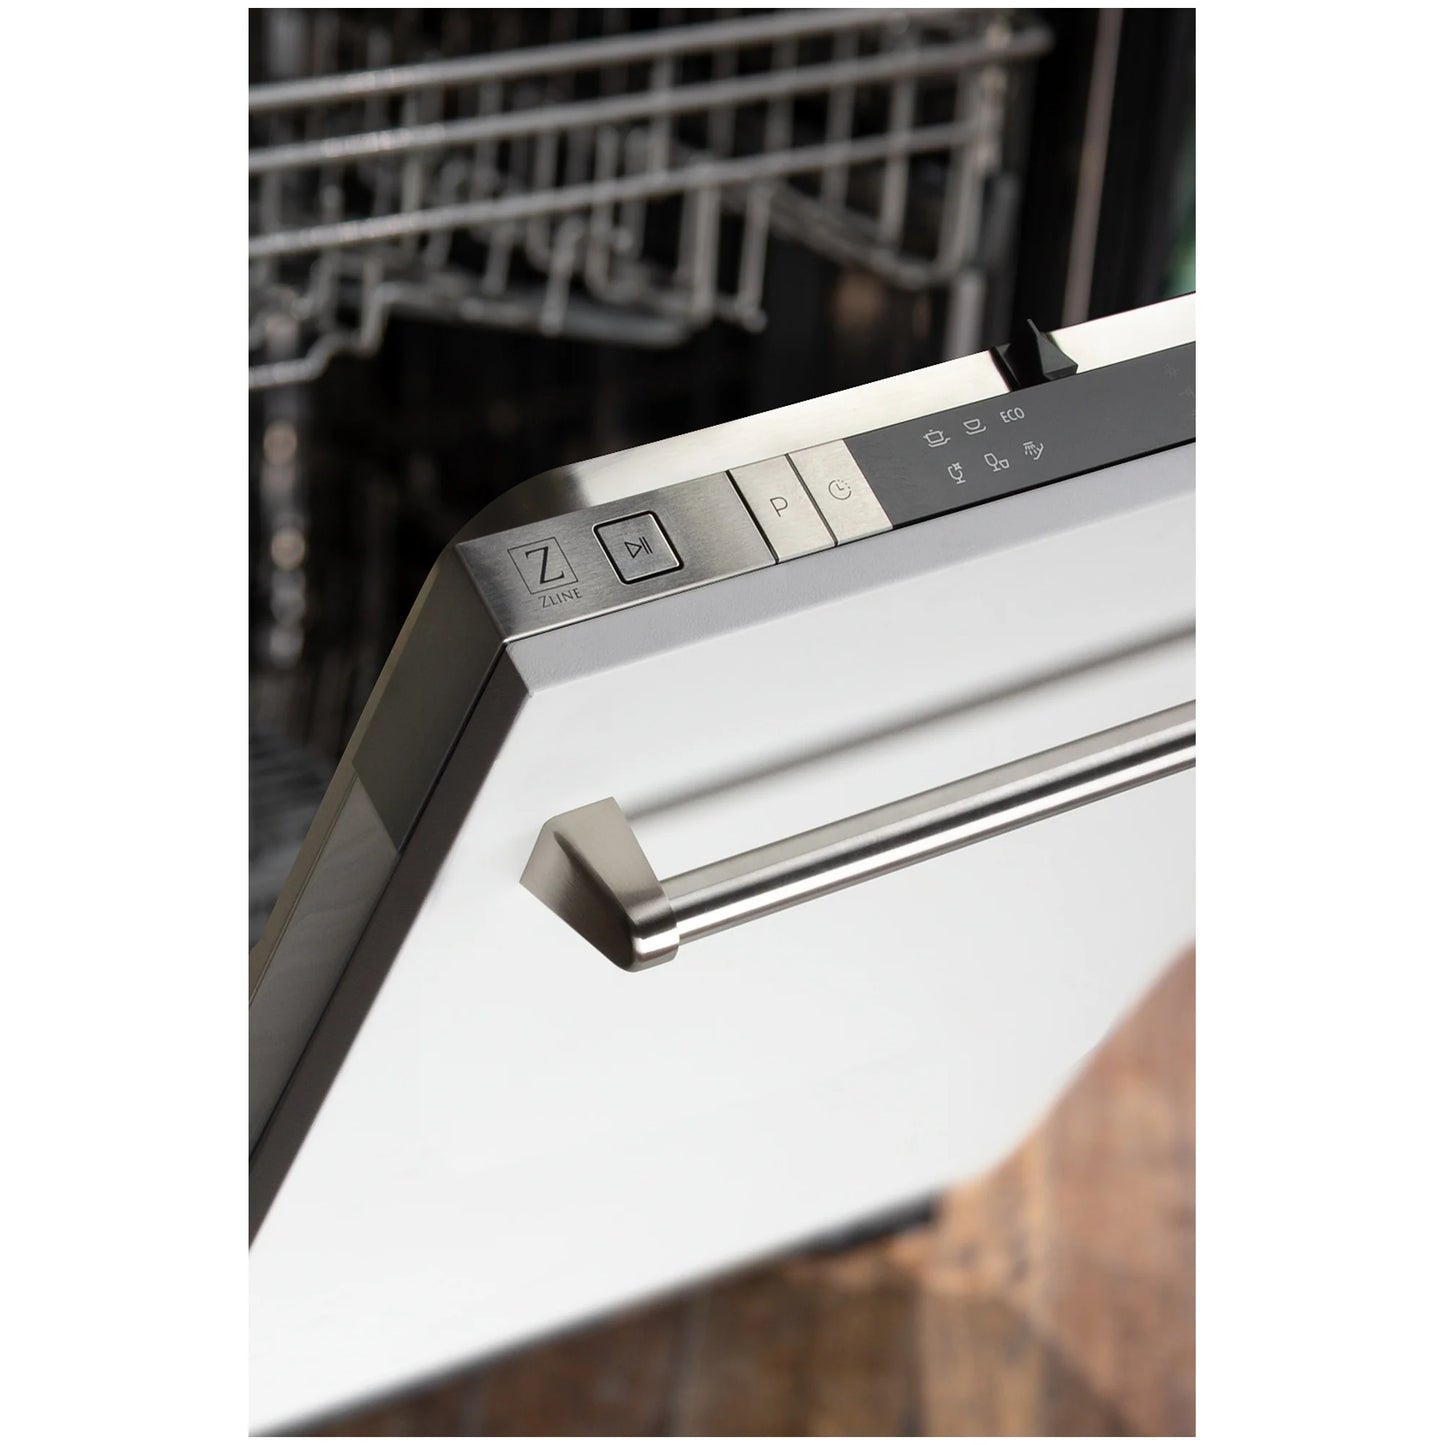 ZLINE 18 in. Compact Top Control Dishwasher with White Matte Panel and Traditional Handle (DW-WM-18)